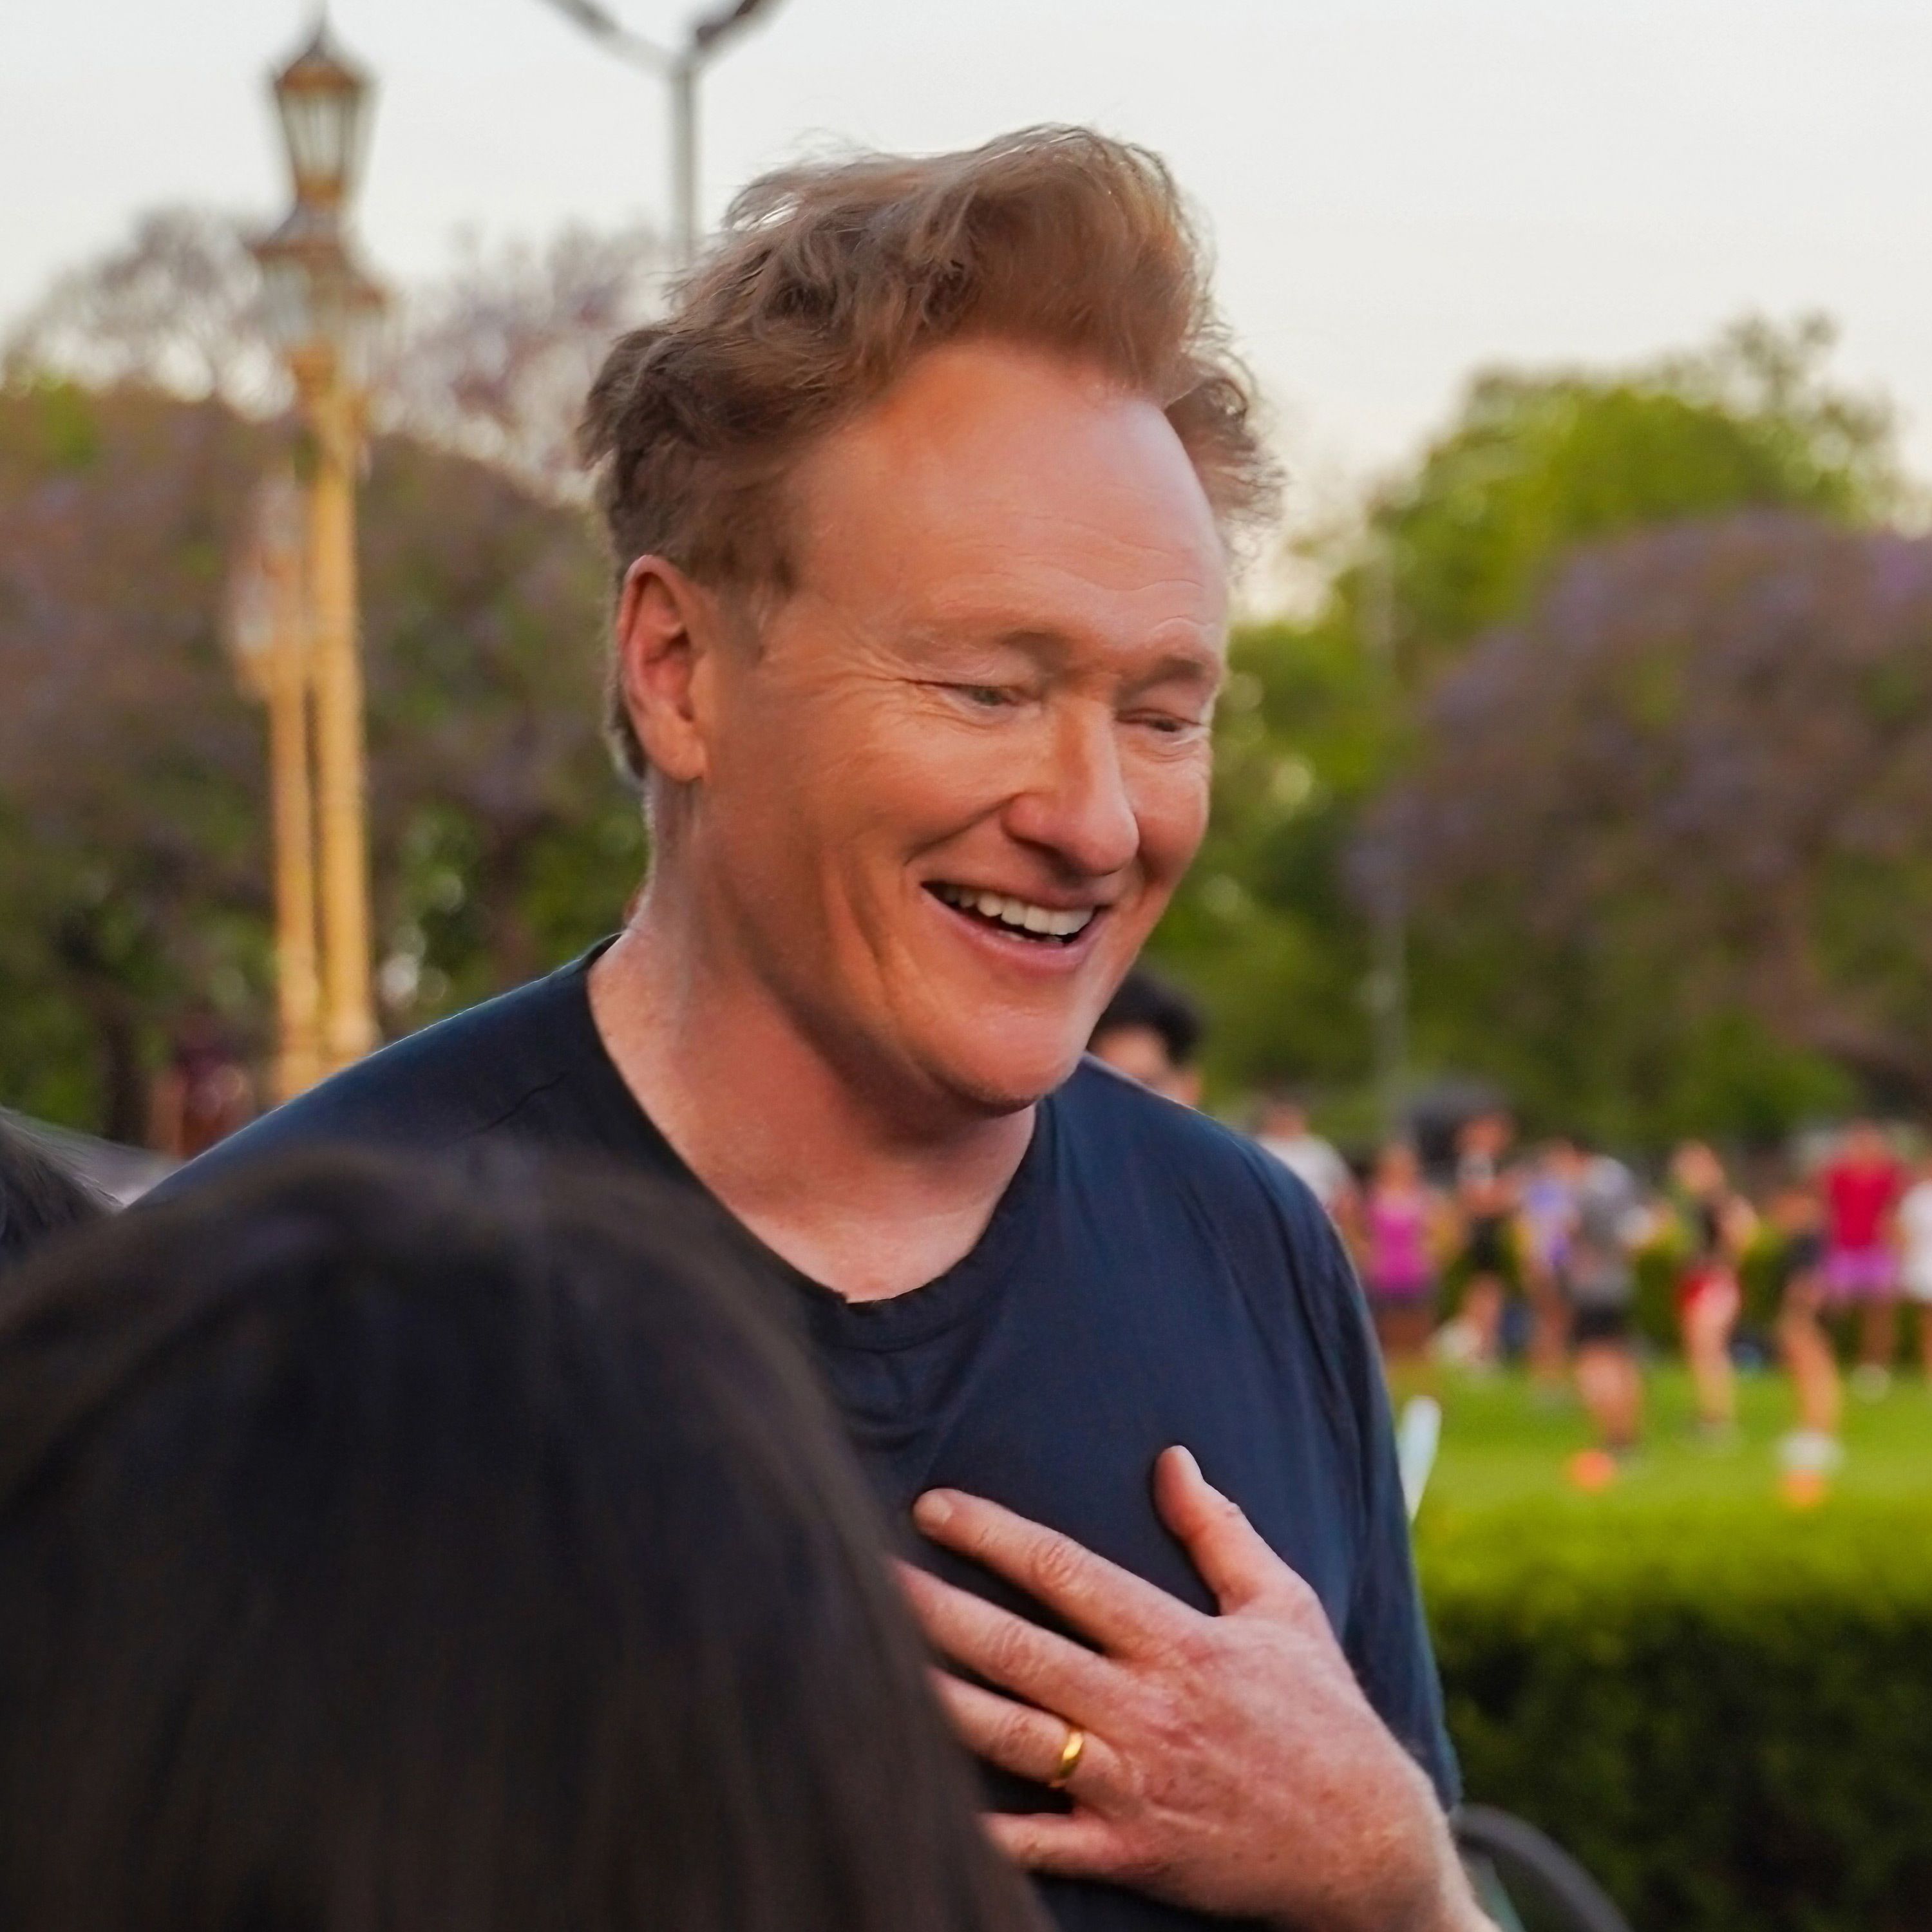 508: Fastening Our Seatbelts For Conan O’Brien Must Go